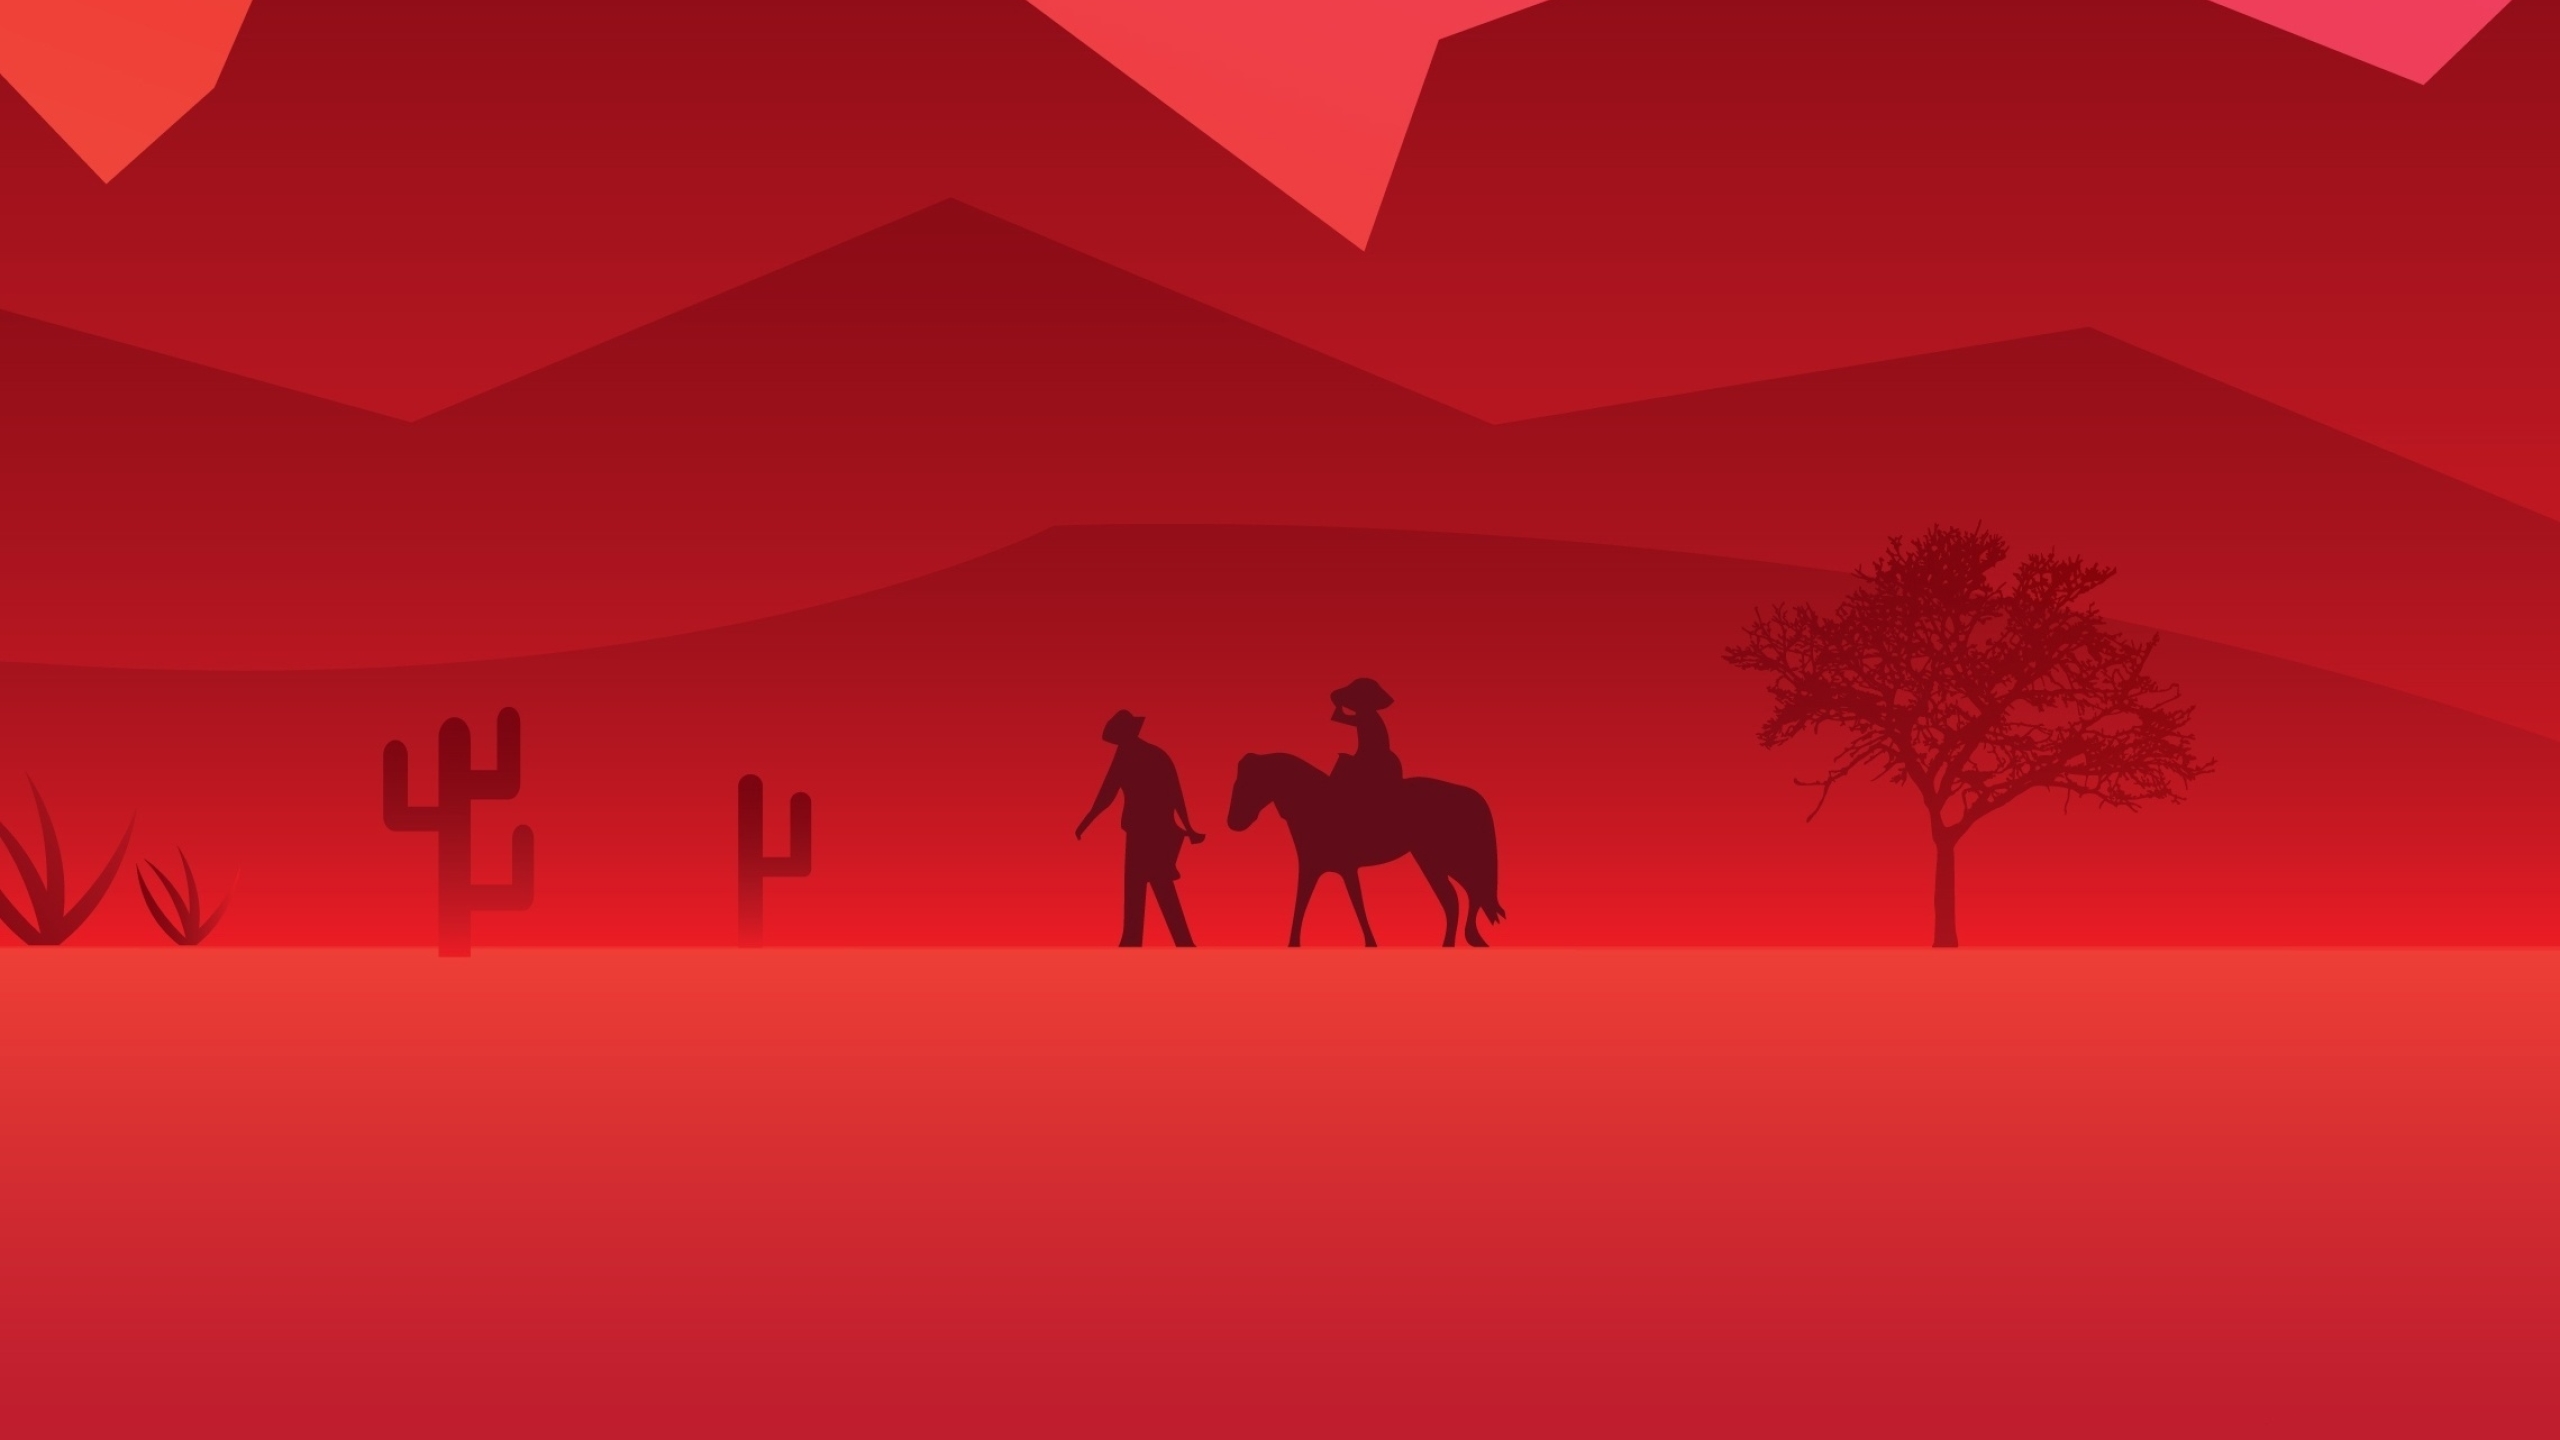 Red Dead Redemption 2 Backgrounds - HD Wallpaper 